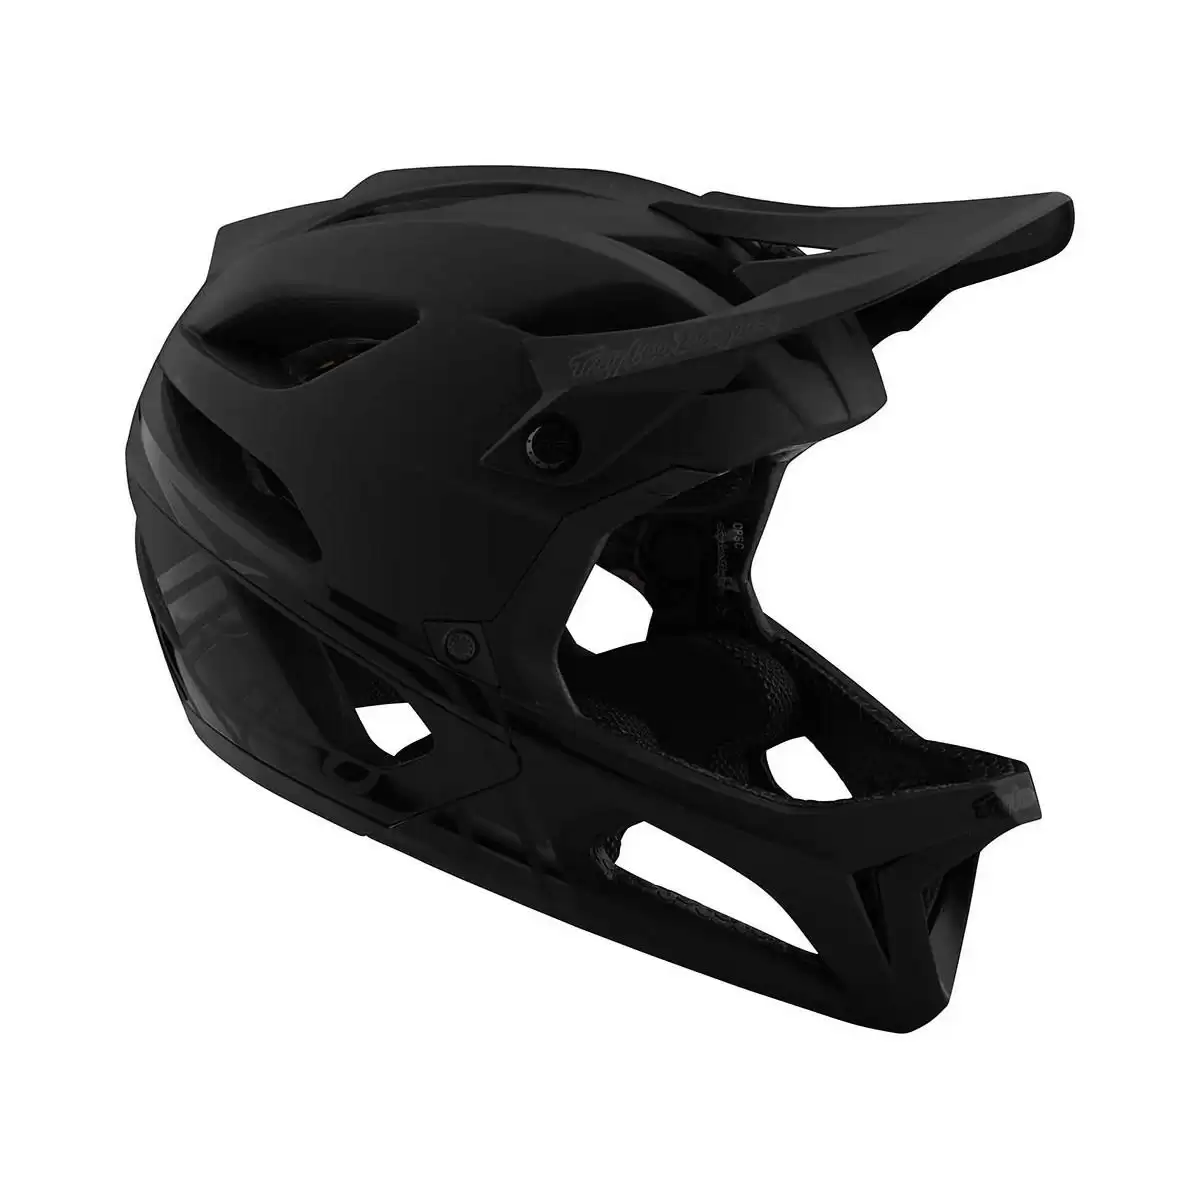 Capacete Facial Stage MIPS Stealth Midnight Black Tamanho M/L (57-59cm) #1